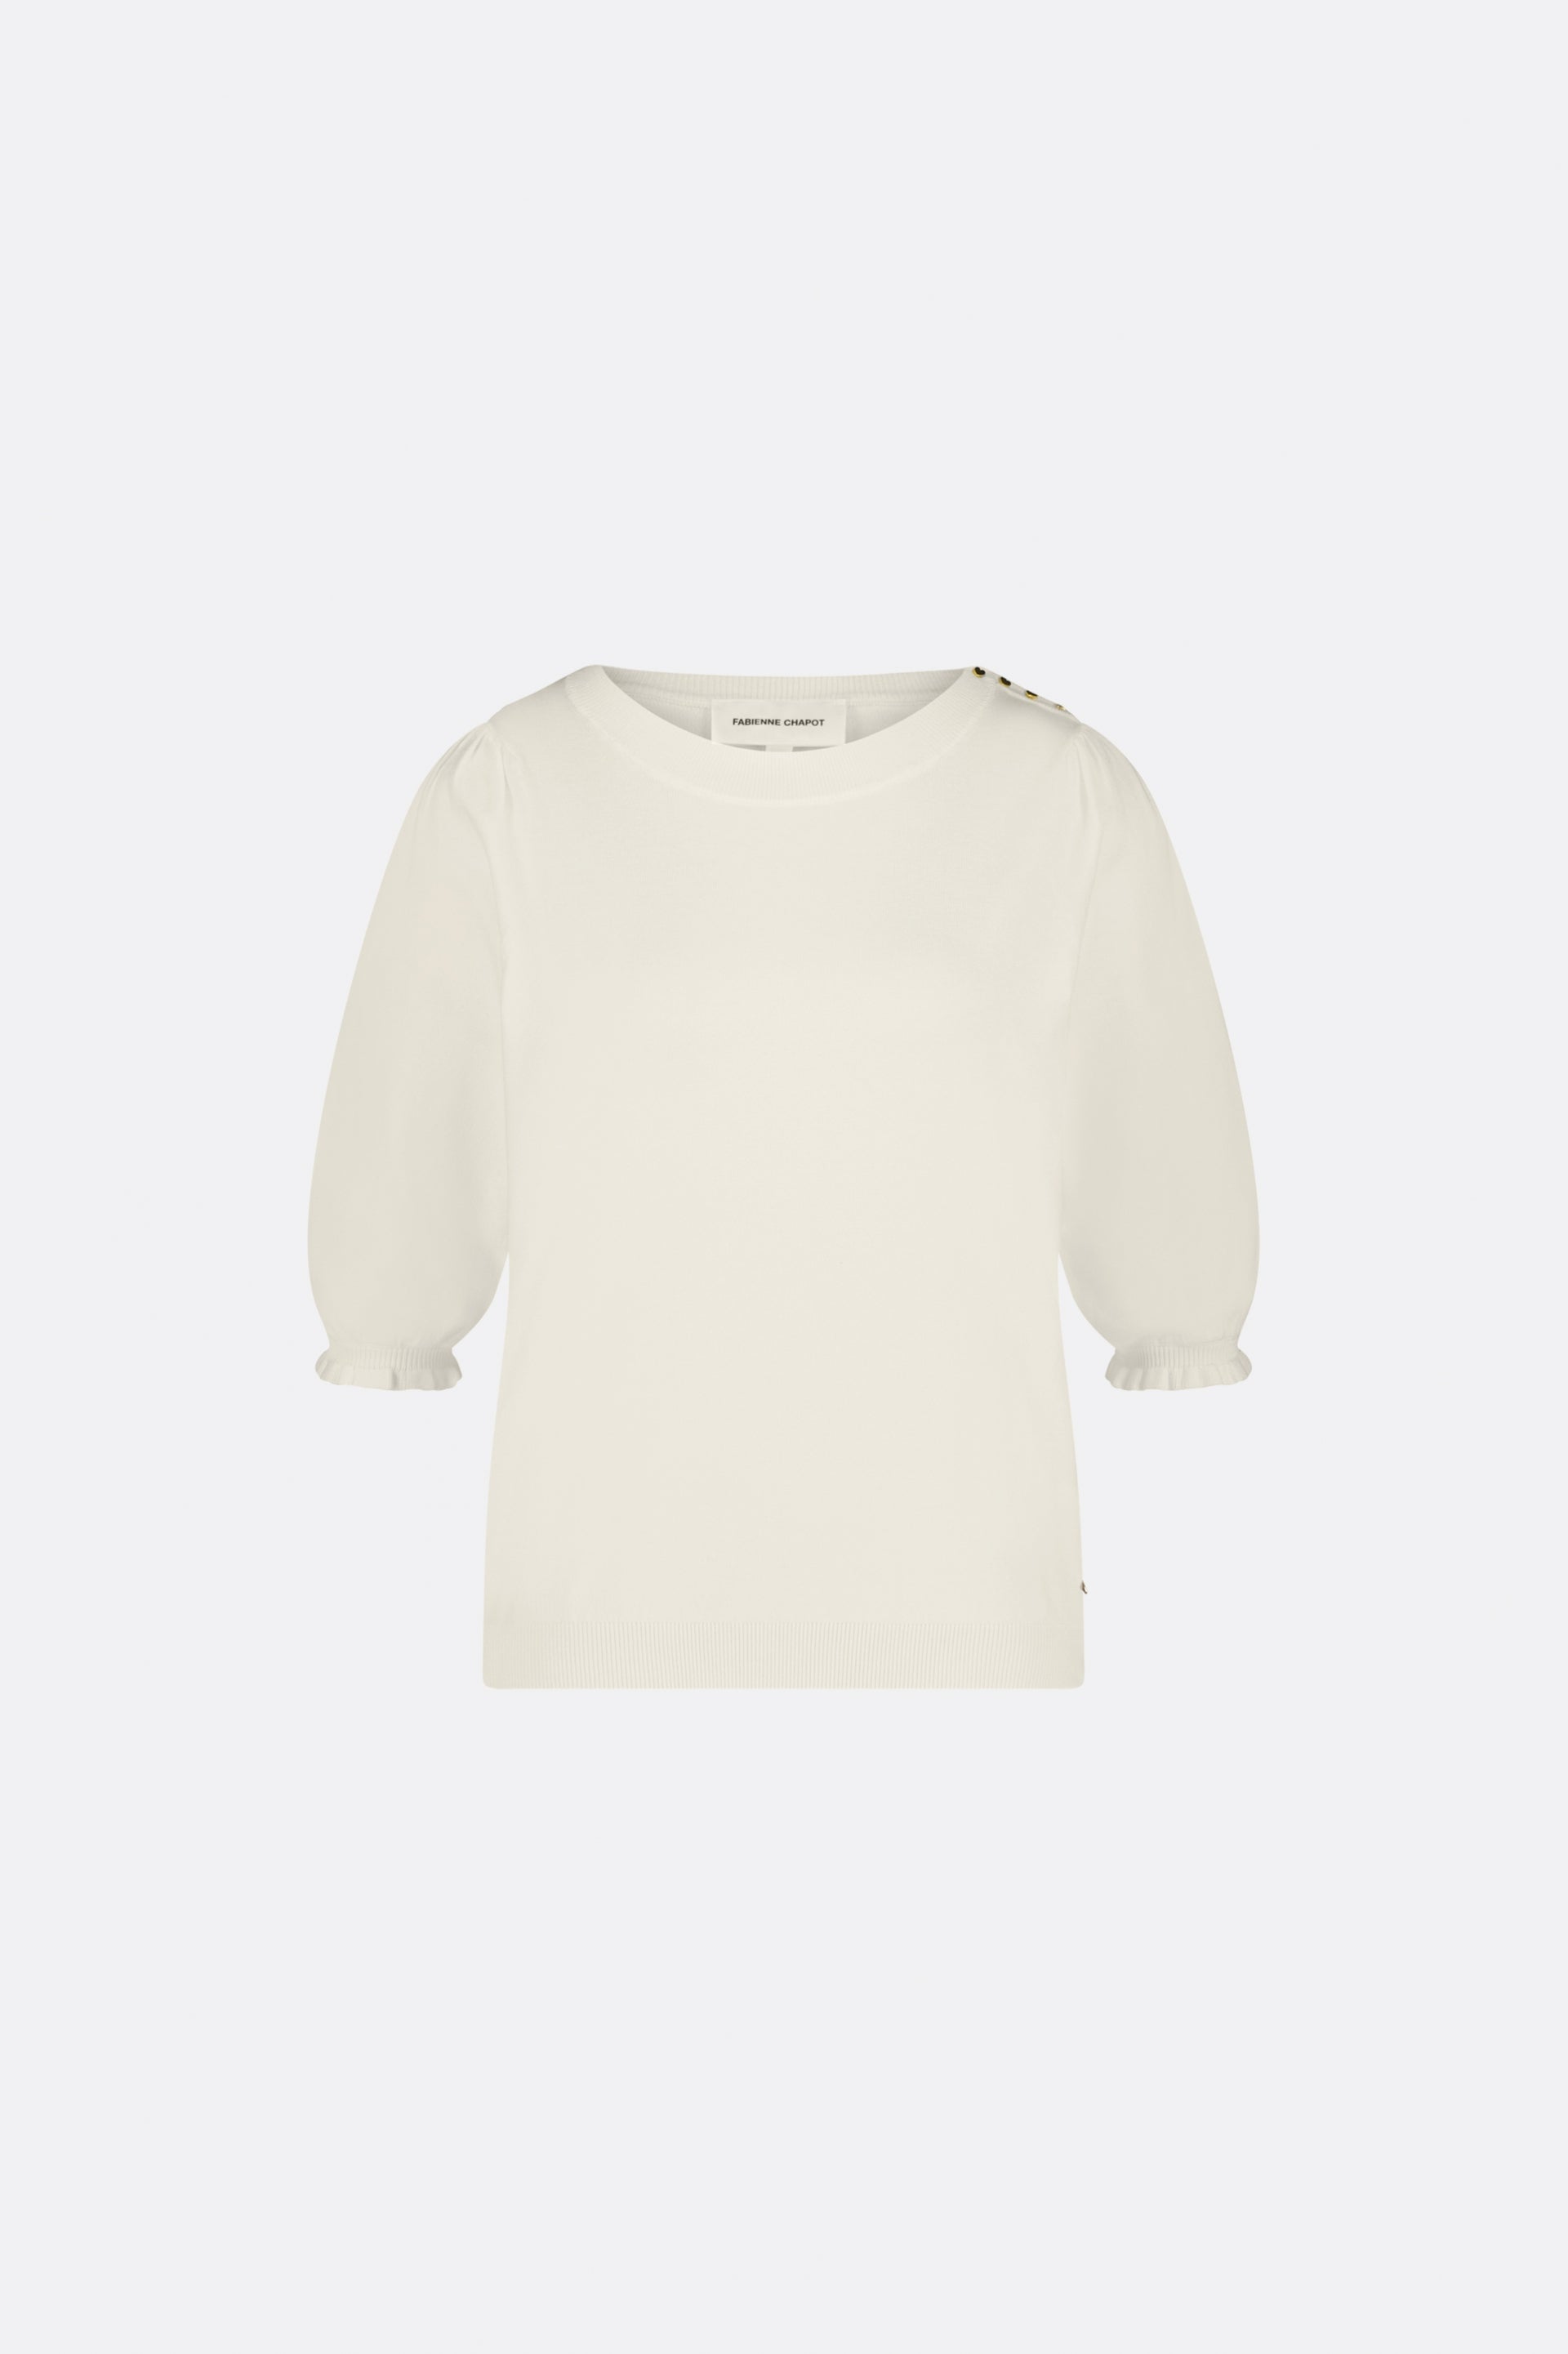 Milly SS Pullover | Cream White